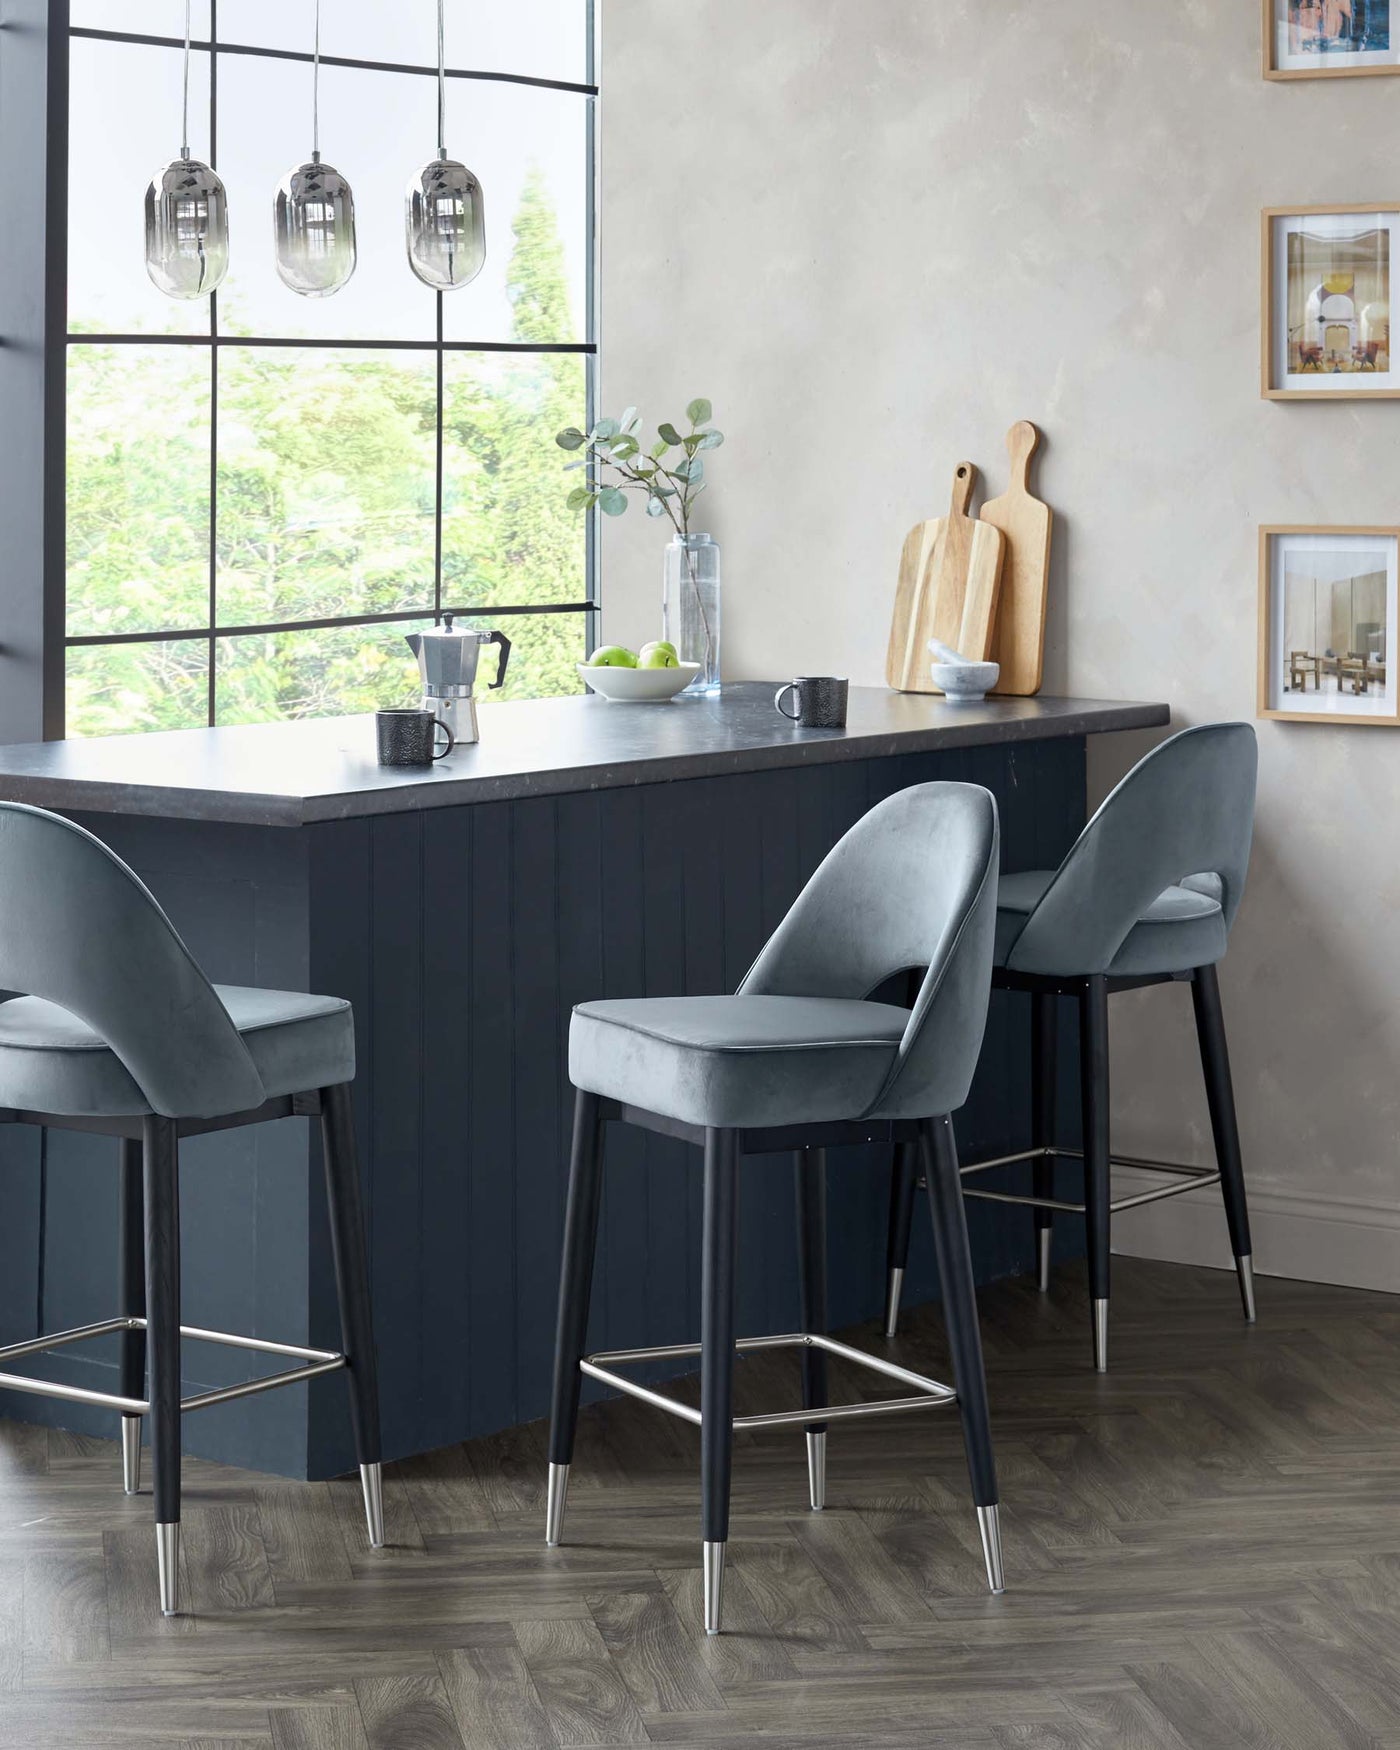 Modern grey velvet bar chairs with black legs and metallic footrests in front of a kitchen island with a black base and a grey countertop in a stylish kitchen setting.